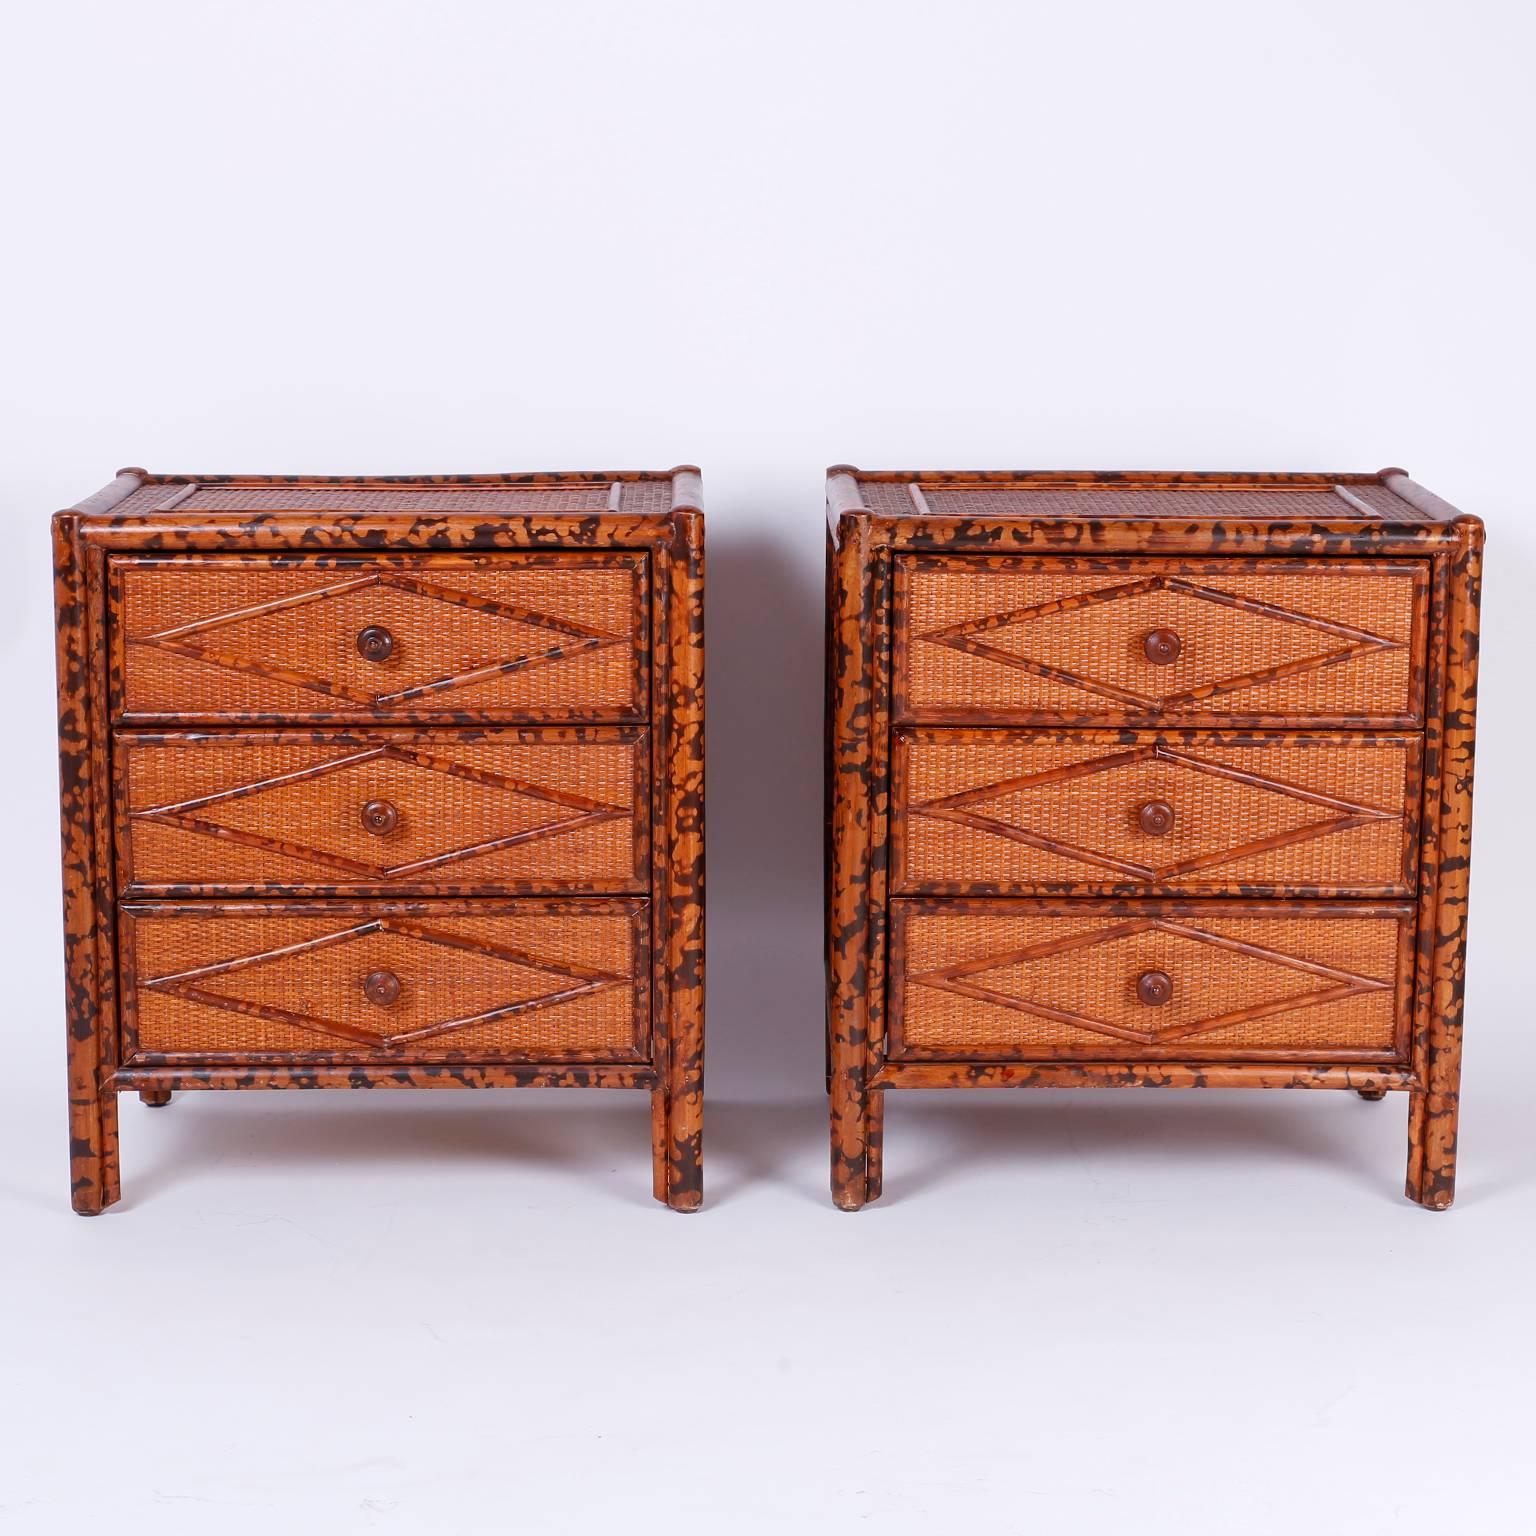 
Handsome mid century pair of three-drawer rattan style nightstands or tables with a robust organic palette composed of faux burnt bamboo and grass cloth. Originally sold at Bloomingdales as noted on the plaque in a drawer.

Chests or bedside tables